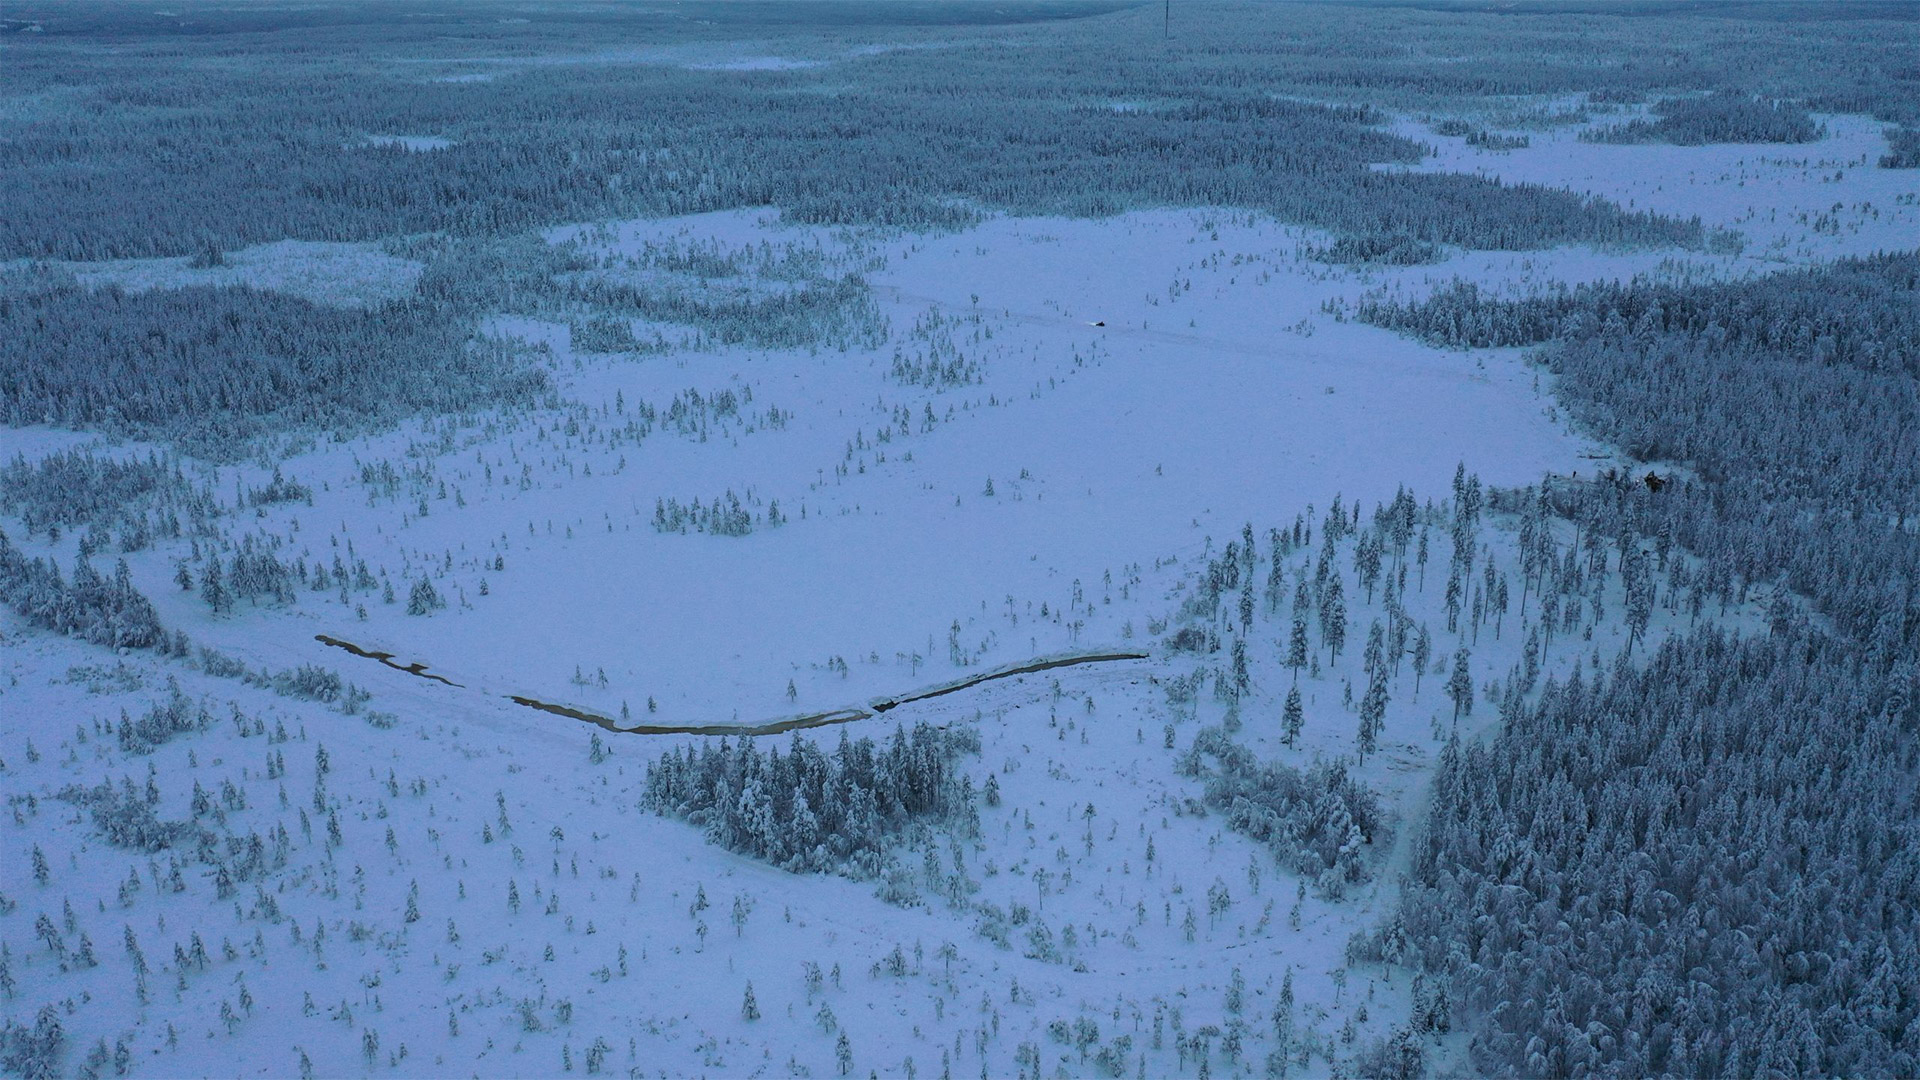 Wintery scenery with lots of snow and forest. Photo taken with a drone.